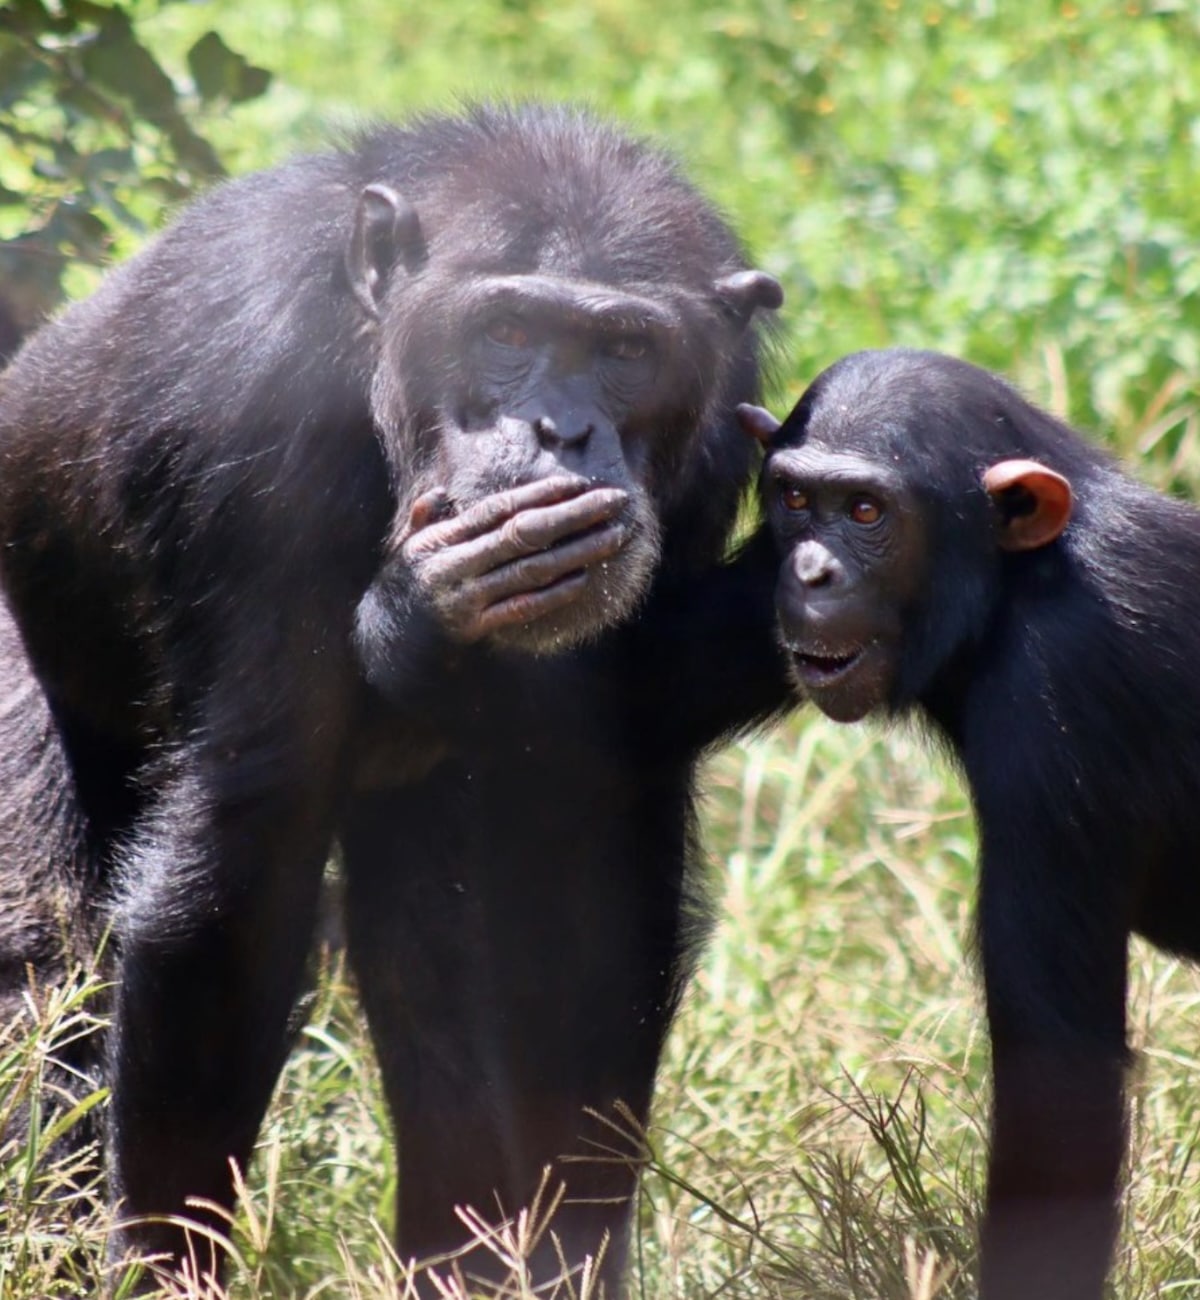 Like Humans, Bumblebees and Chimpanzees Can Pass on Their Skills to Form ‘Cumulative Culture’